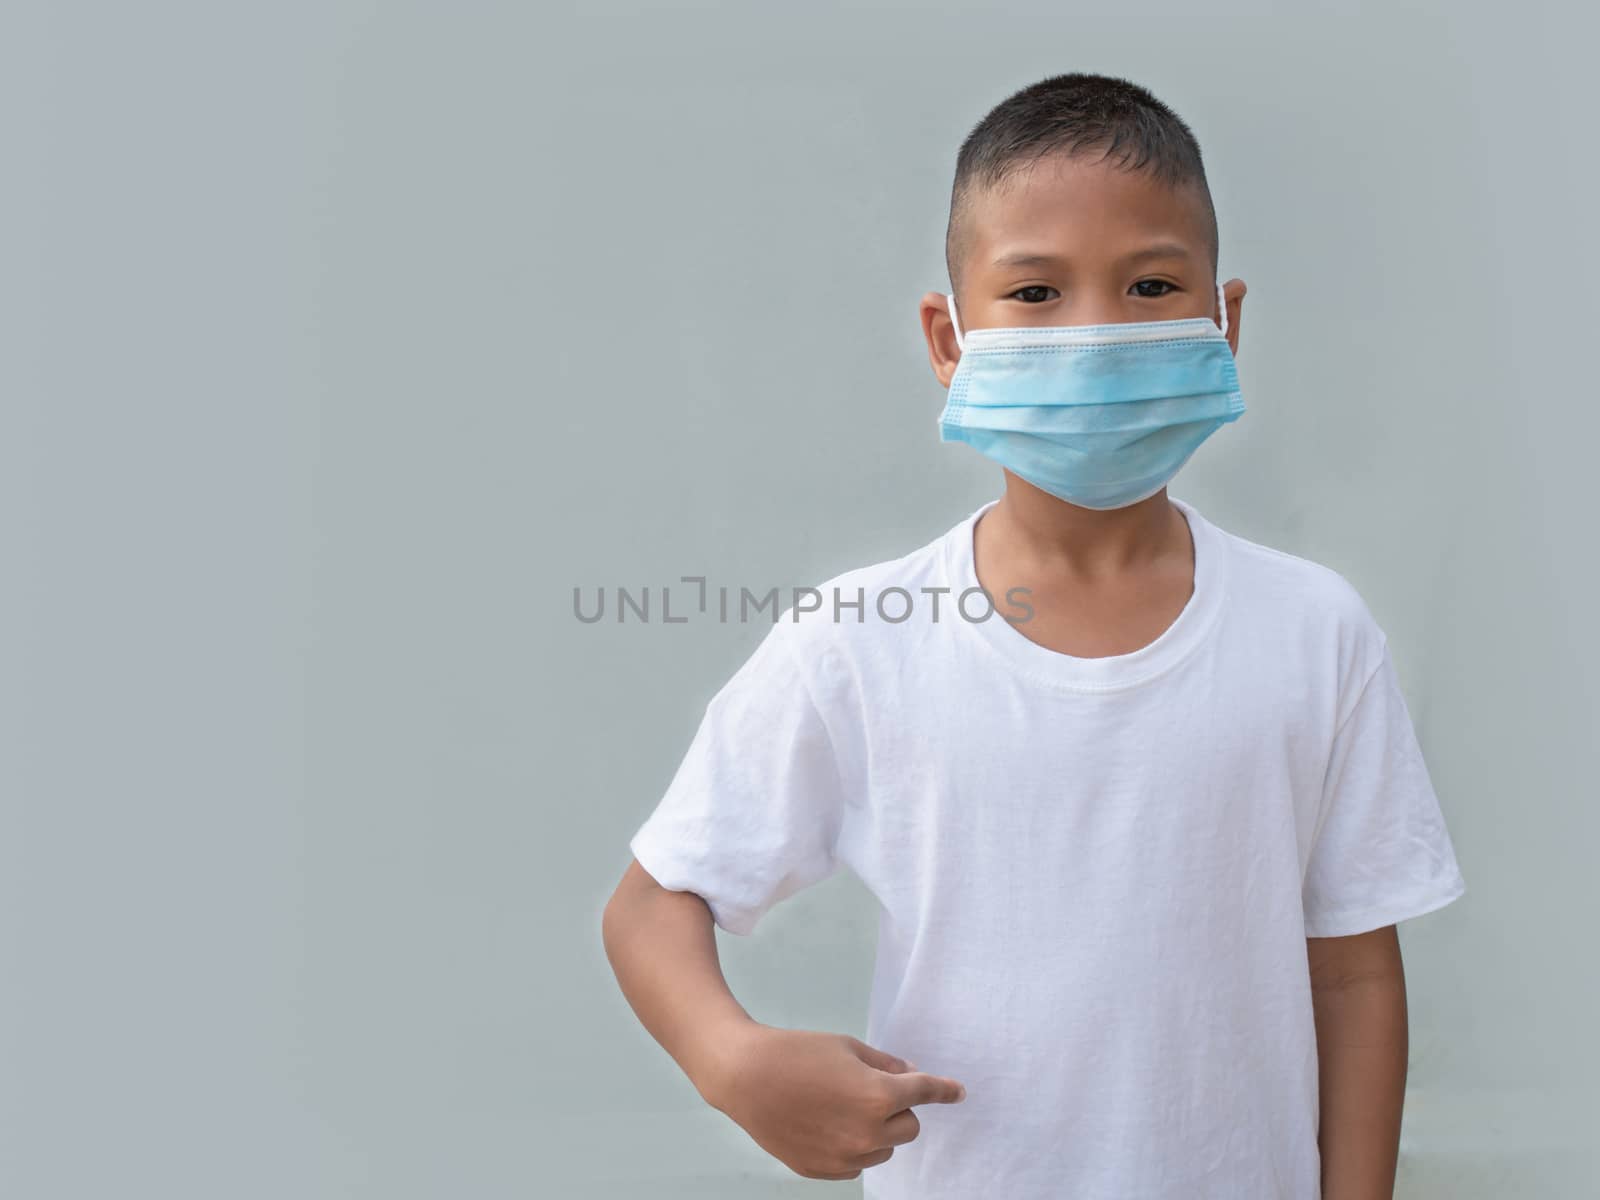 Boy wearing a protective mask On a white background. New normal concept.